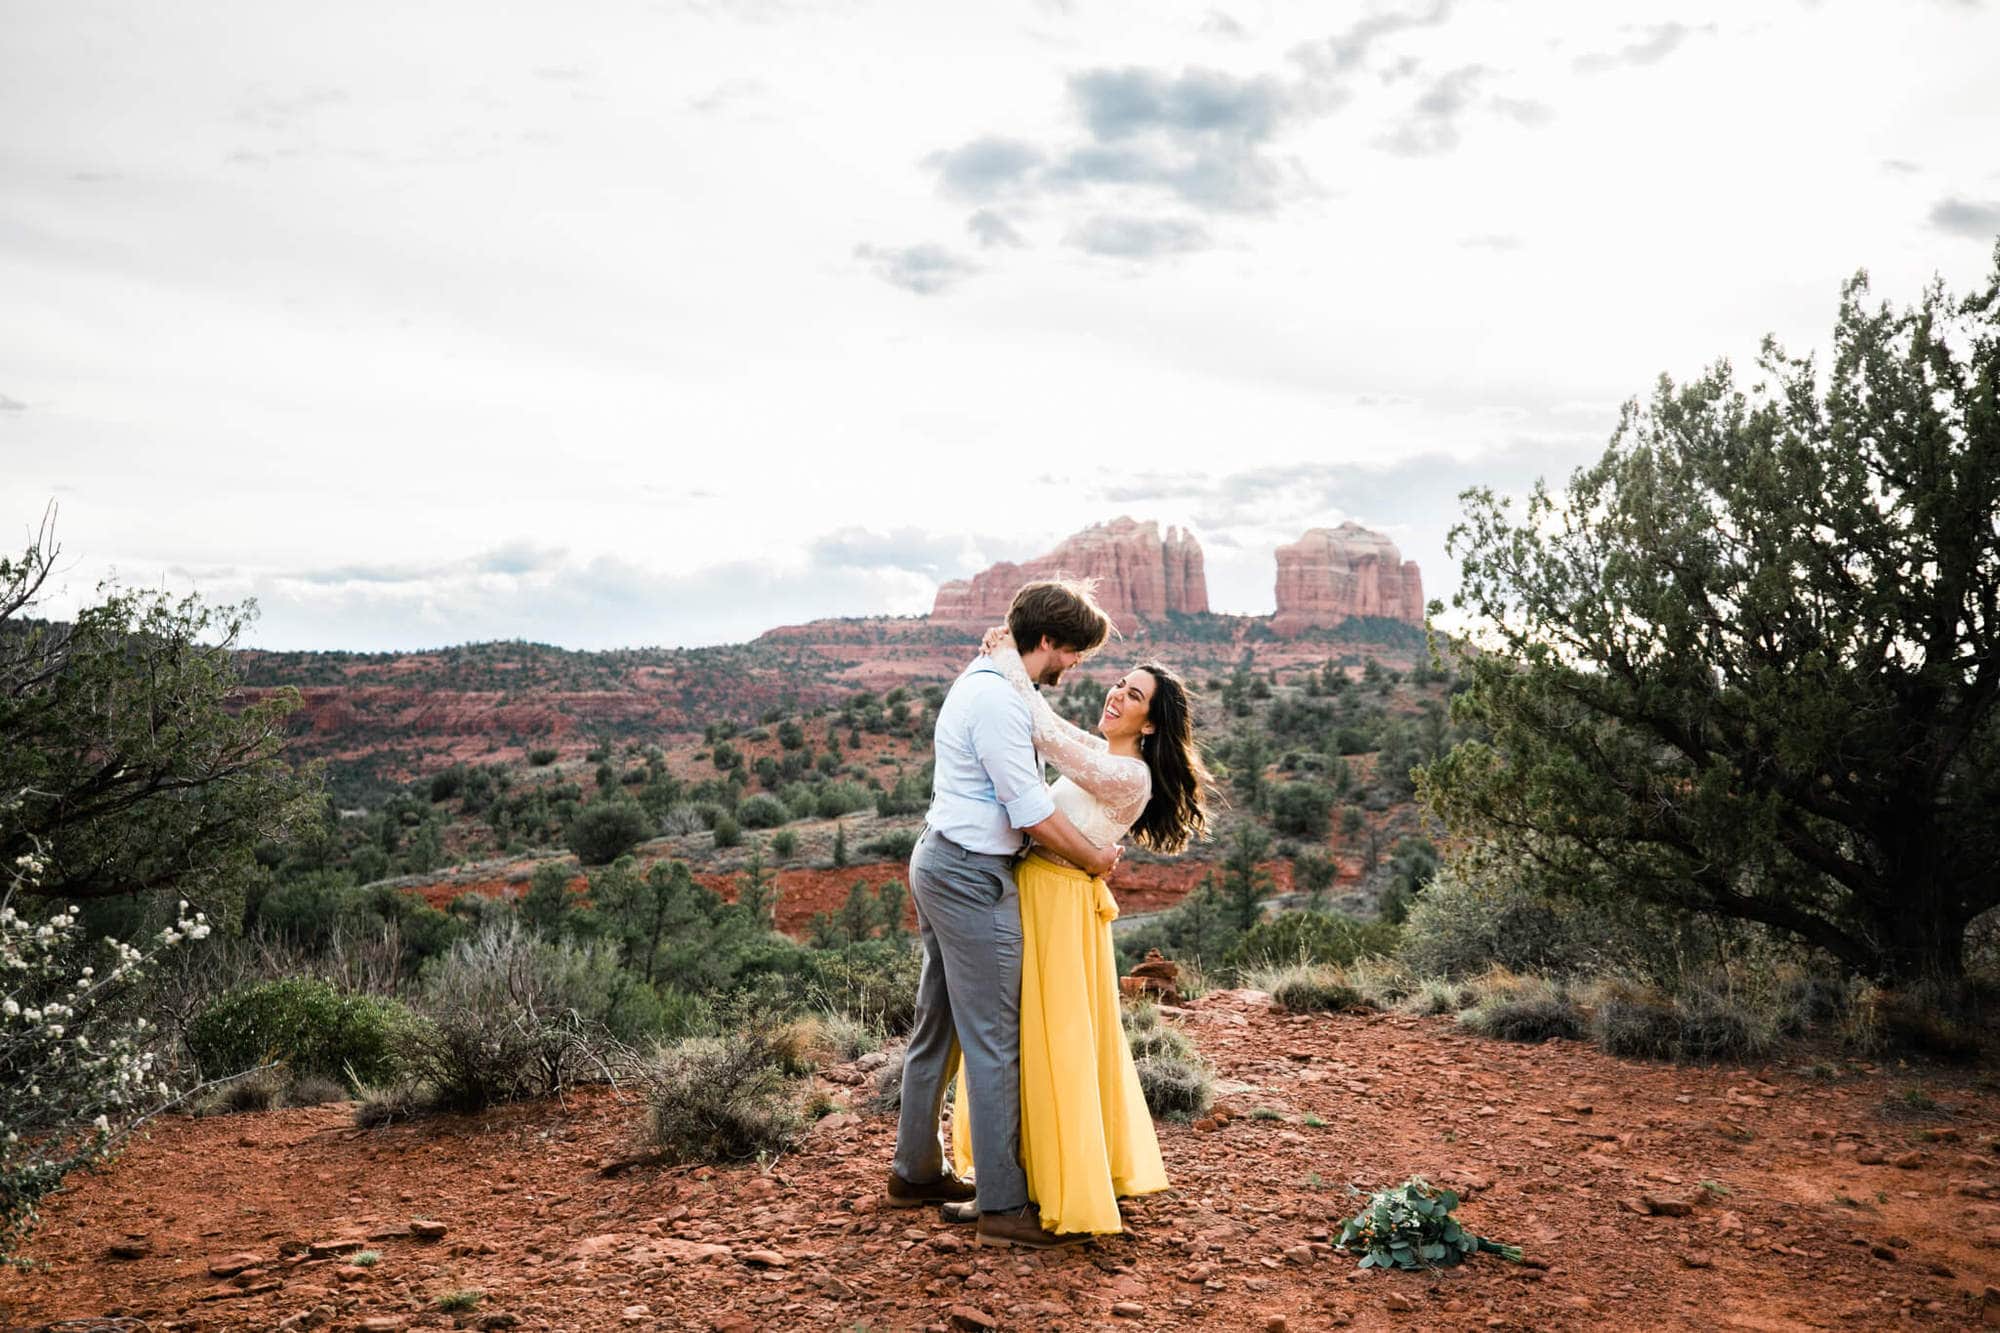 The Arizona desert sky really showed off for this one! Check out Emmy + Keal's beautiful red rock Sedona Elopement-Style vow renewal.